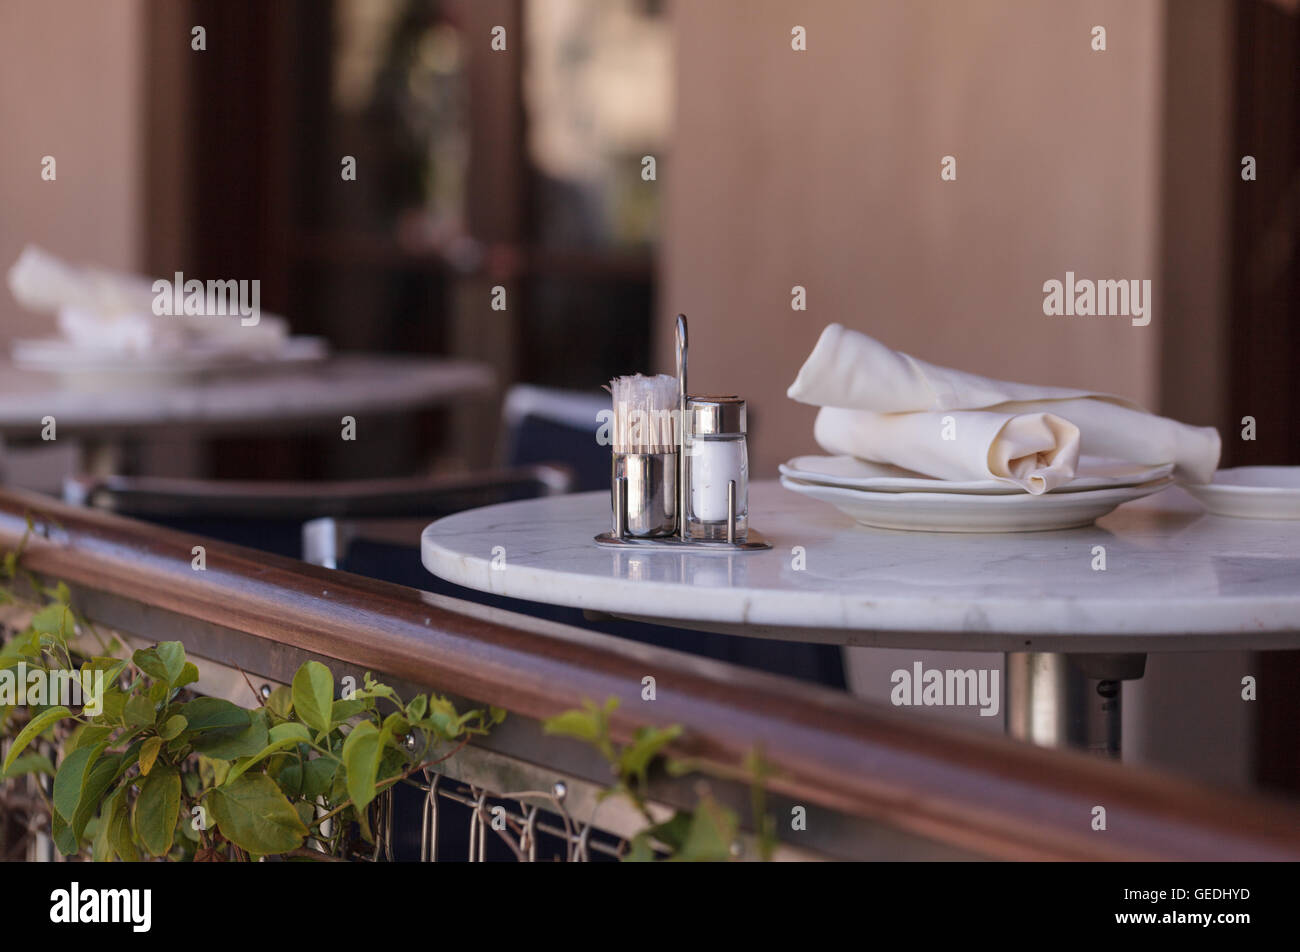 A place setting at an outdoor cafe restaurant in Southern California, United States. Stock Photo